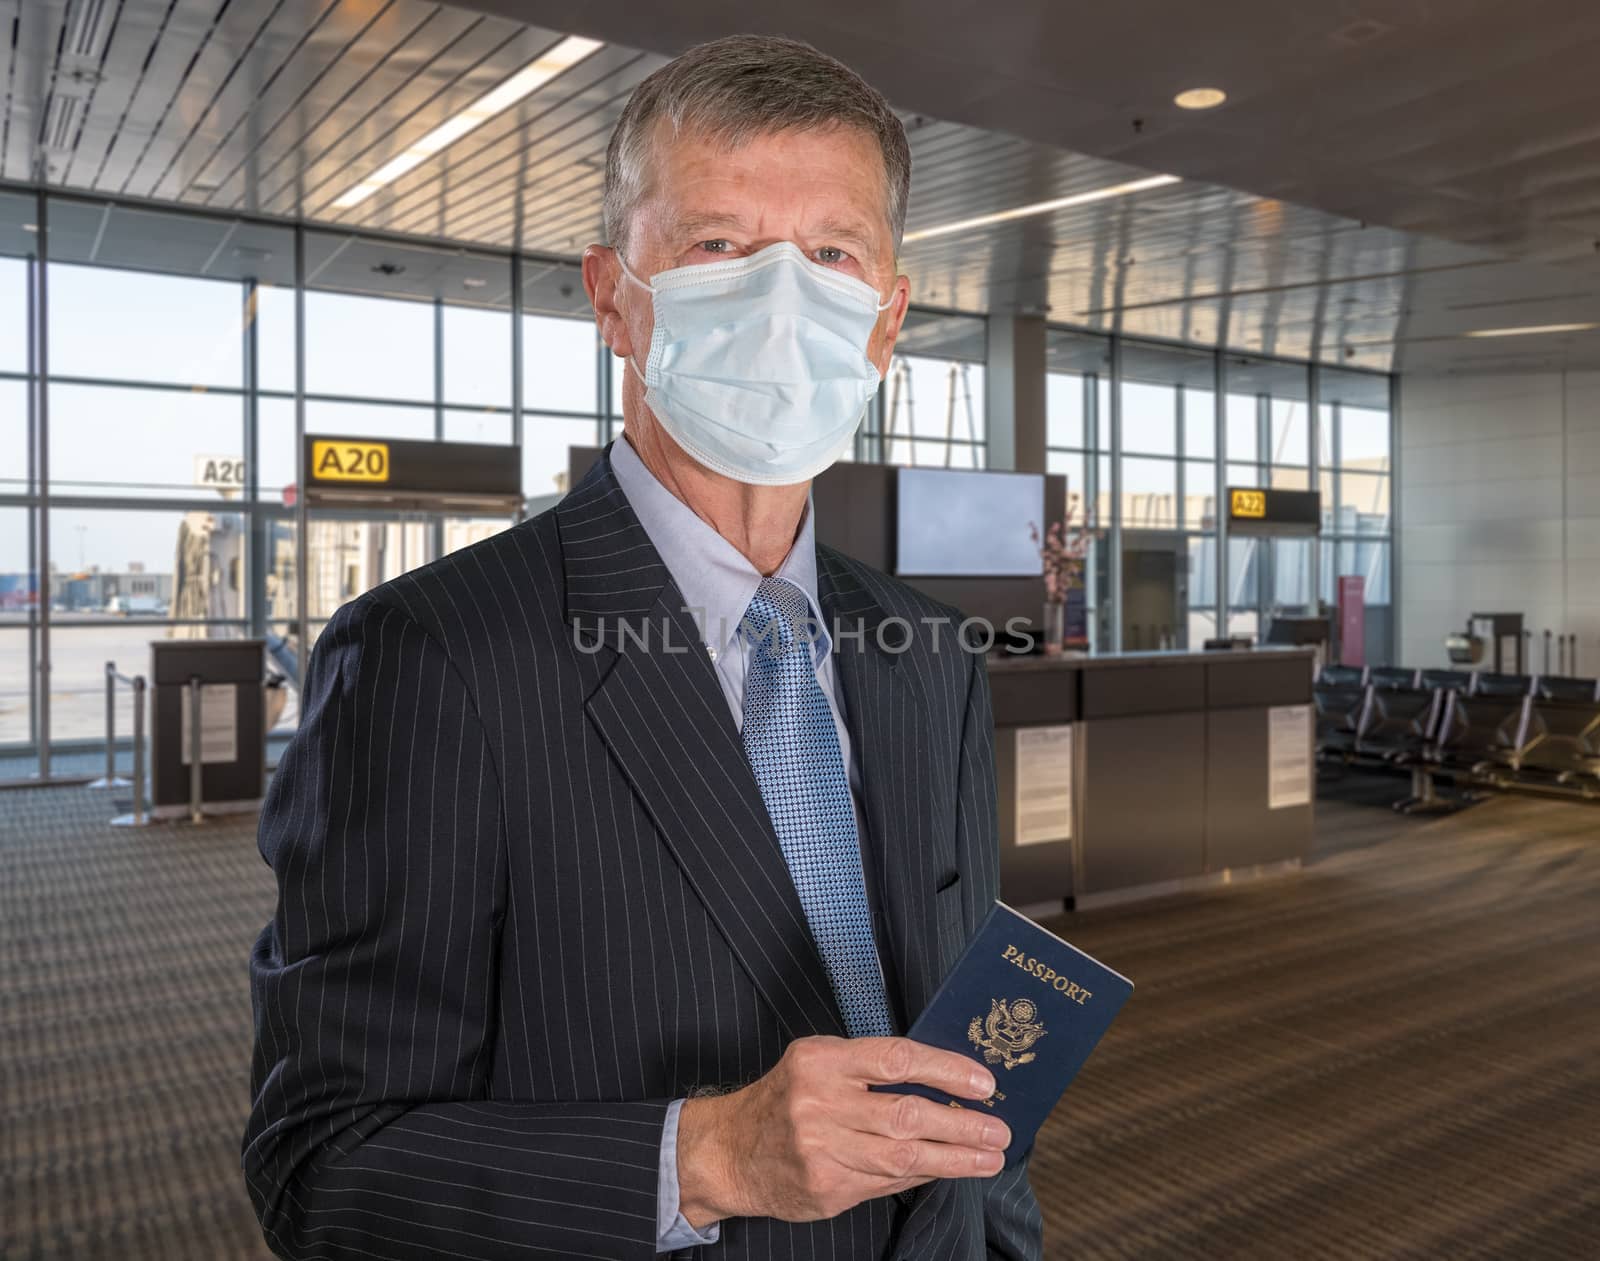 Mockup of airport terminal with casual senior adult holding passport and wearing mask against coronavirus